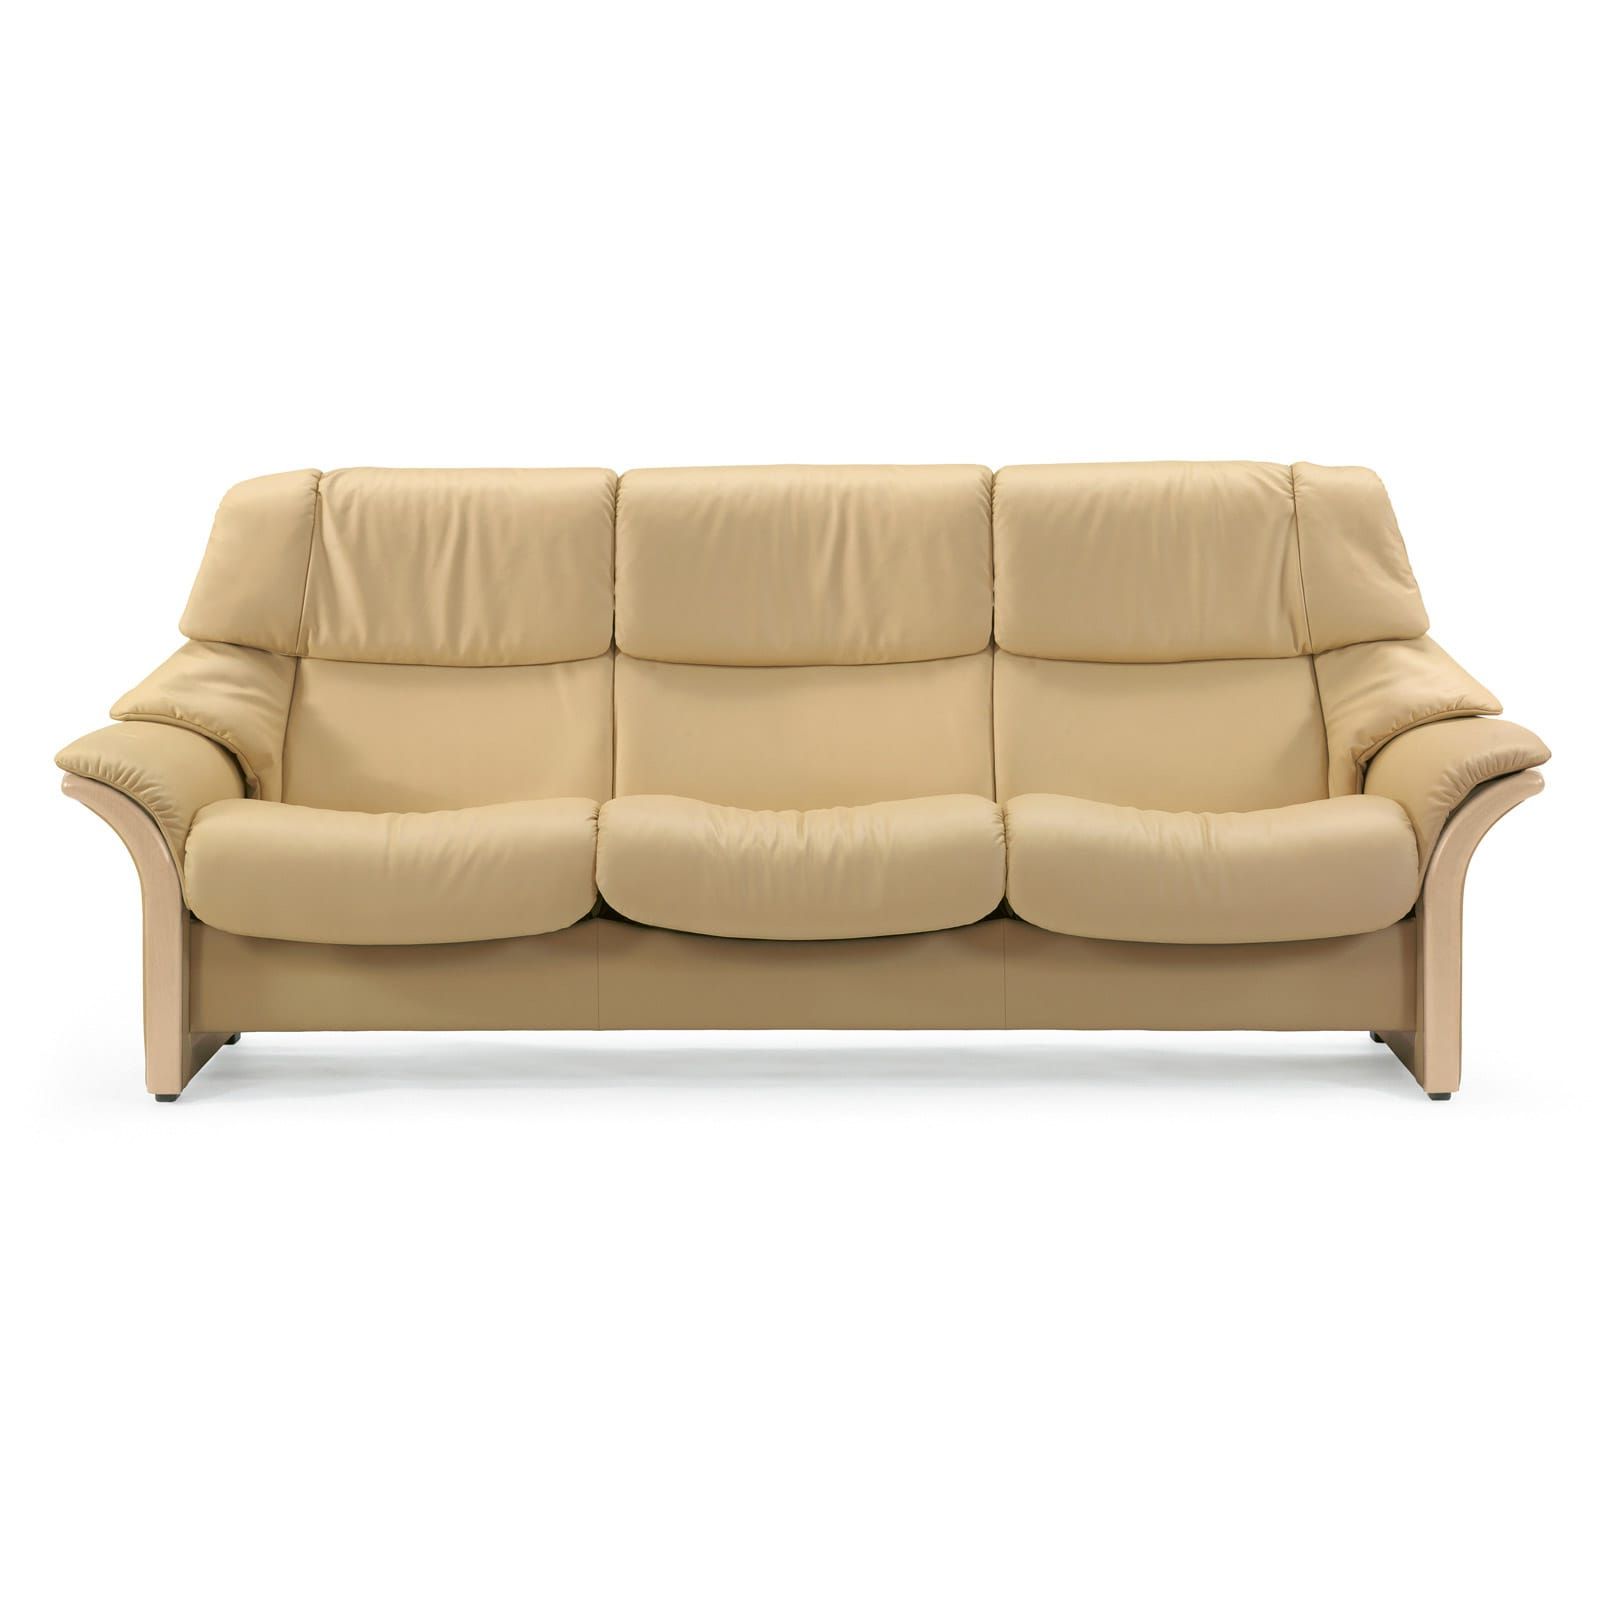 Stressless 3 Sitzer Eldorado (m) Hoch Leder Paloma Sand Holz Natur Regarding Most Up To Date Eldora Patio Sectionals With Cushions (View 17 of 25)